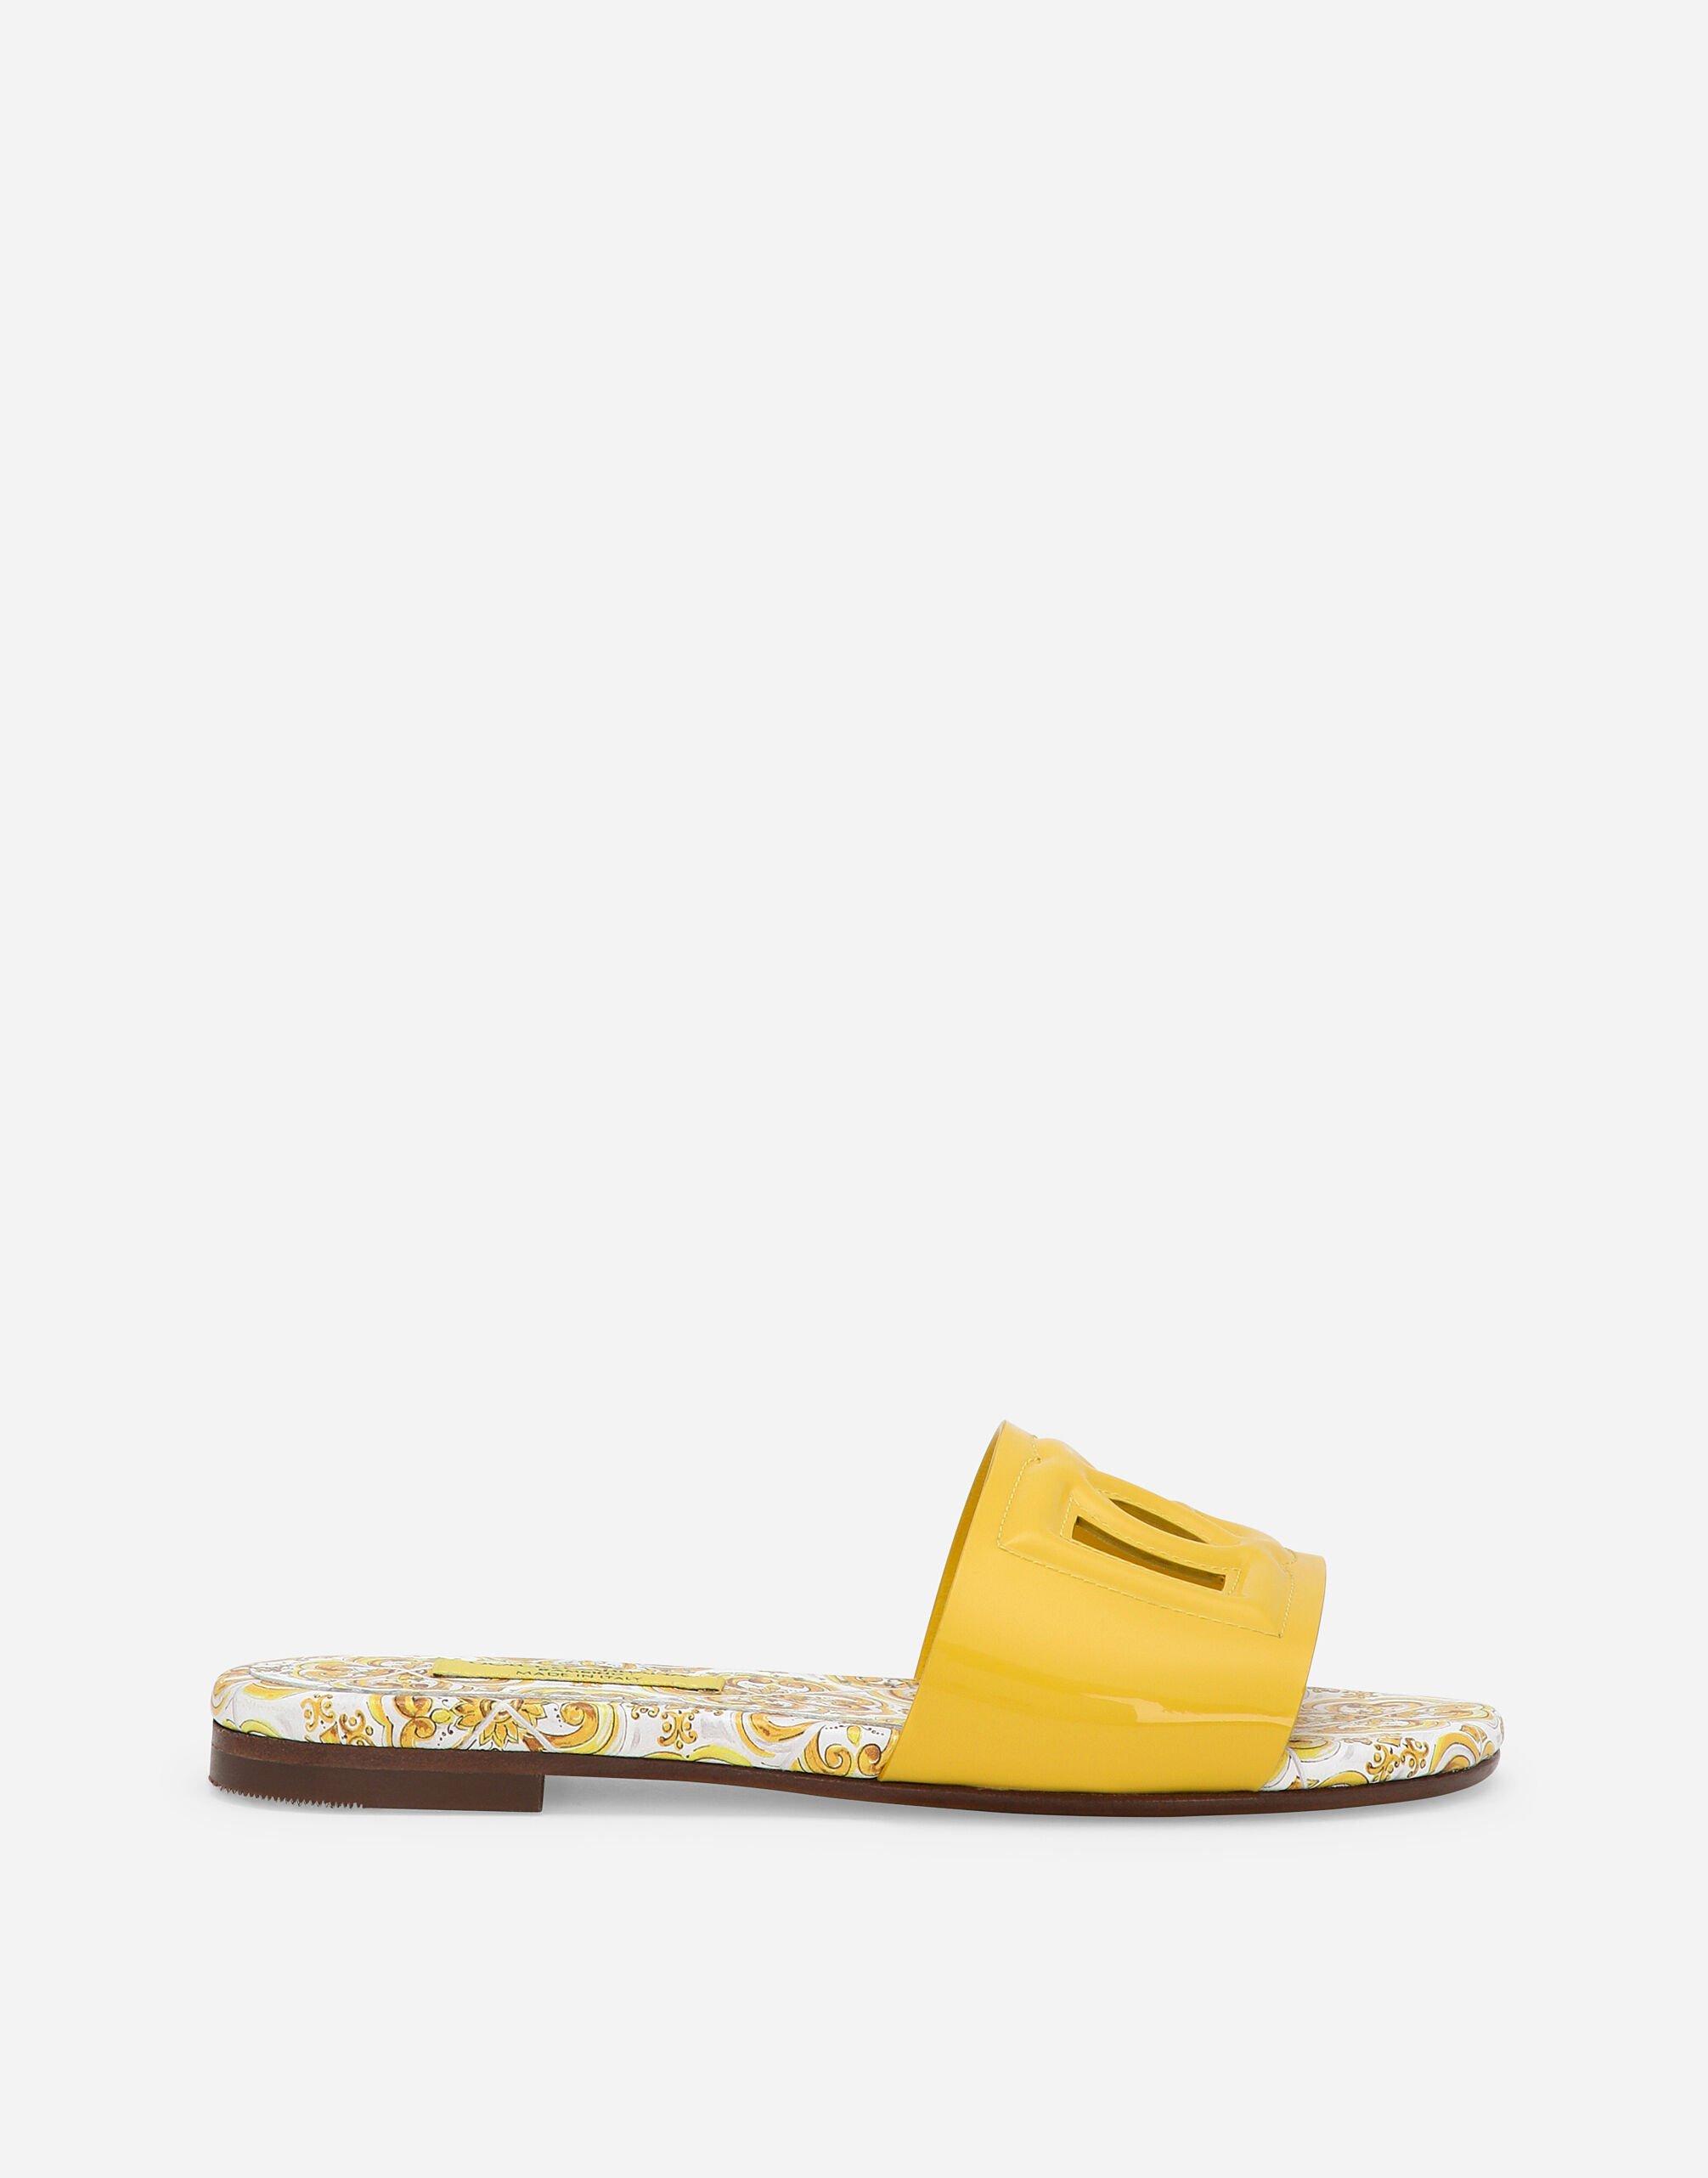 ${brand} Patent leather sliders with yellow majolica print and cut-out DG detail ${colorDescription} ${masterID}